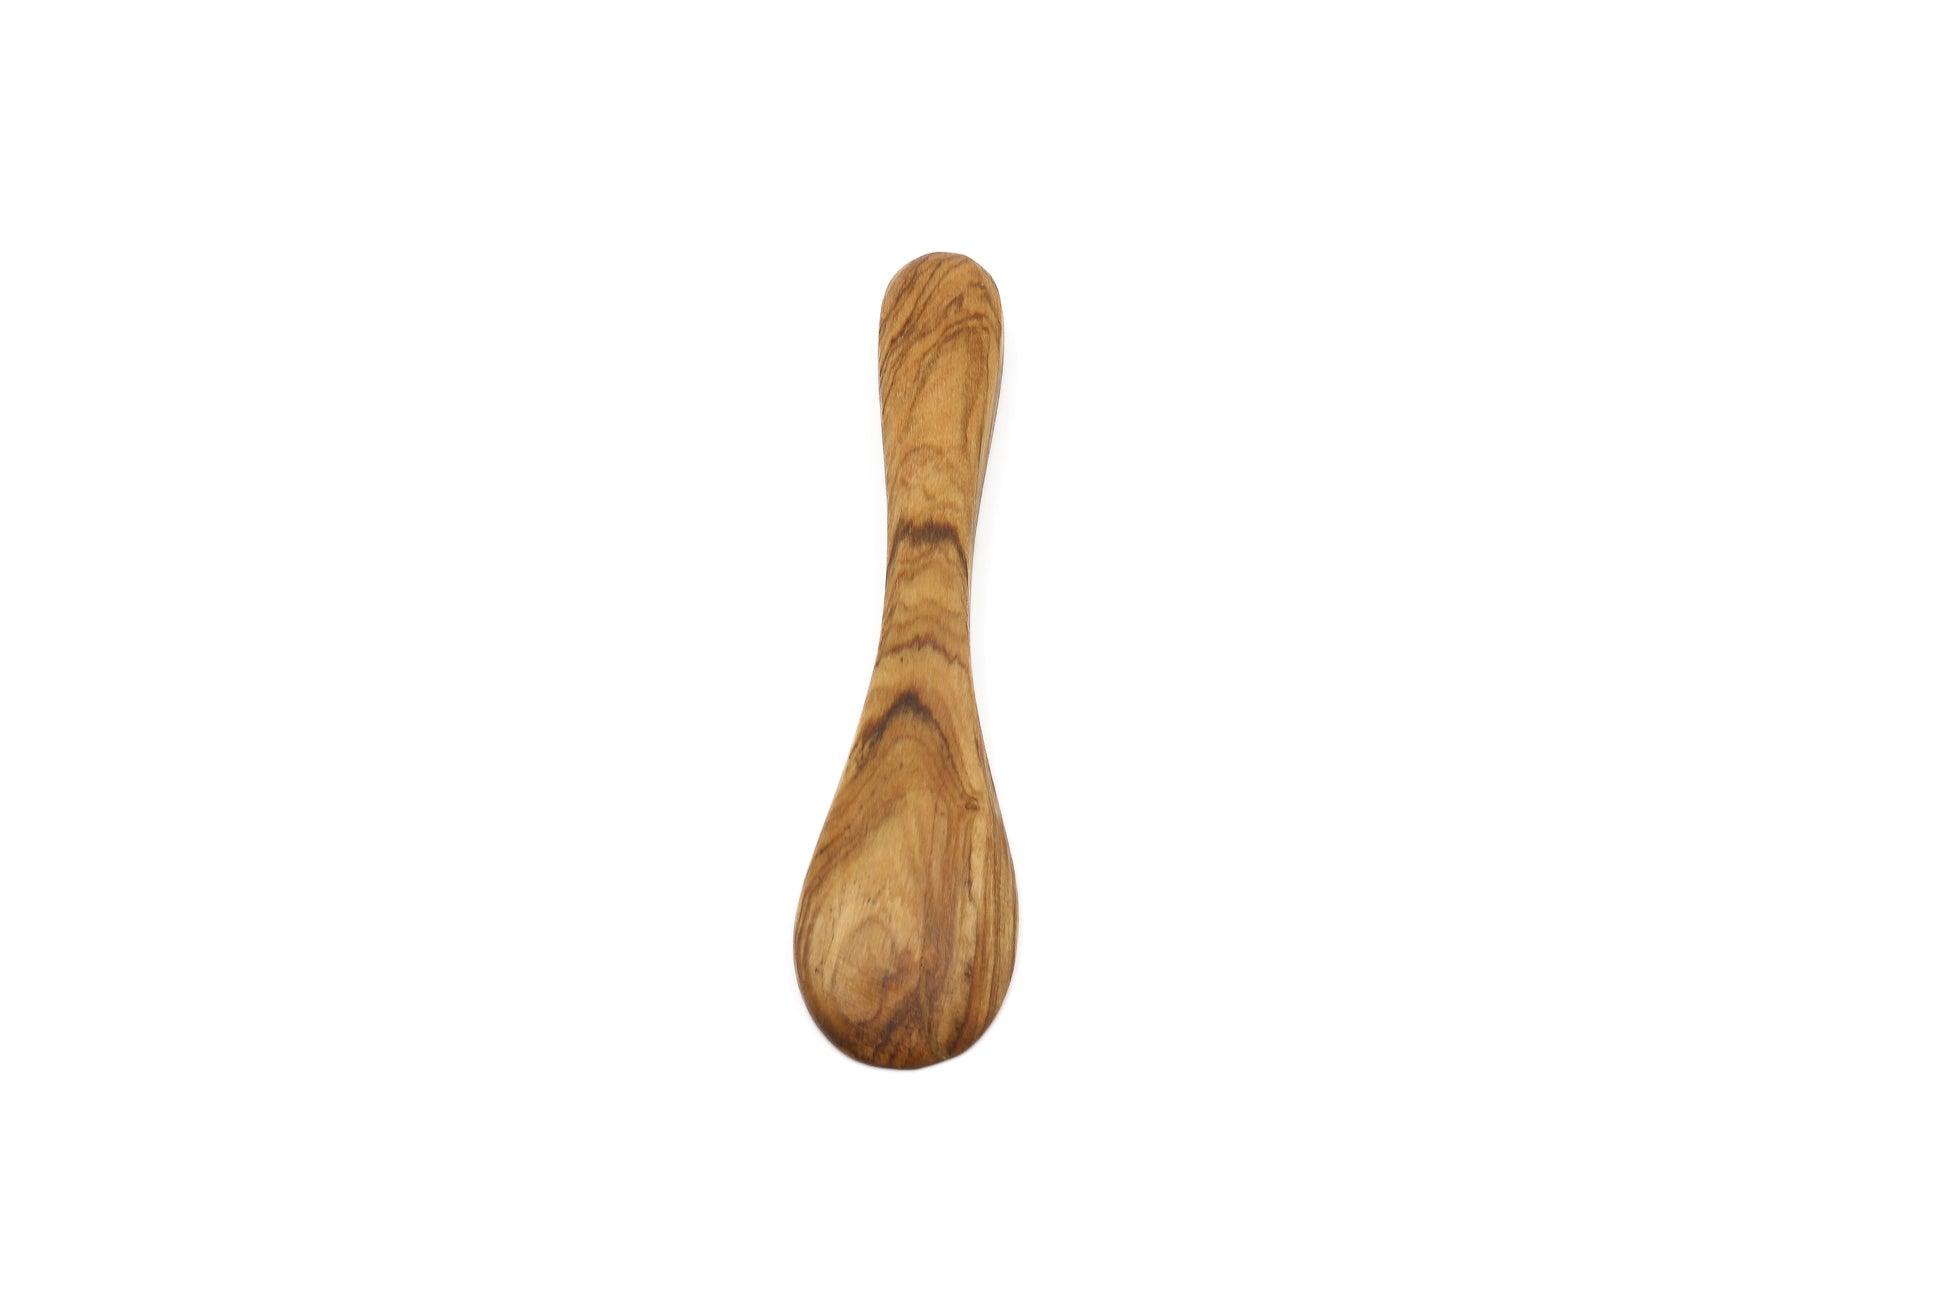 Petite olive wood spoon for various uses